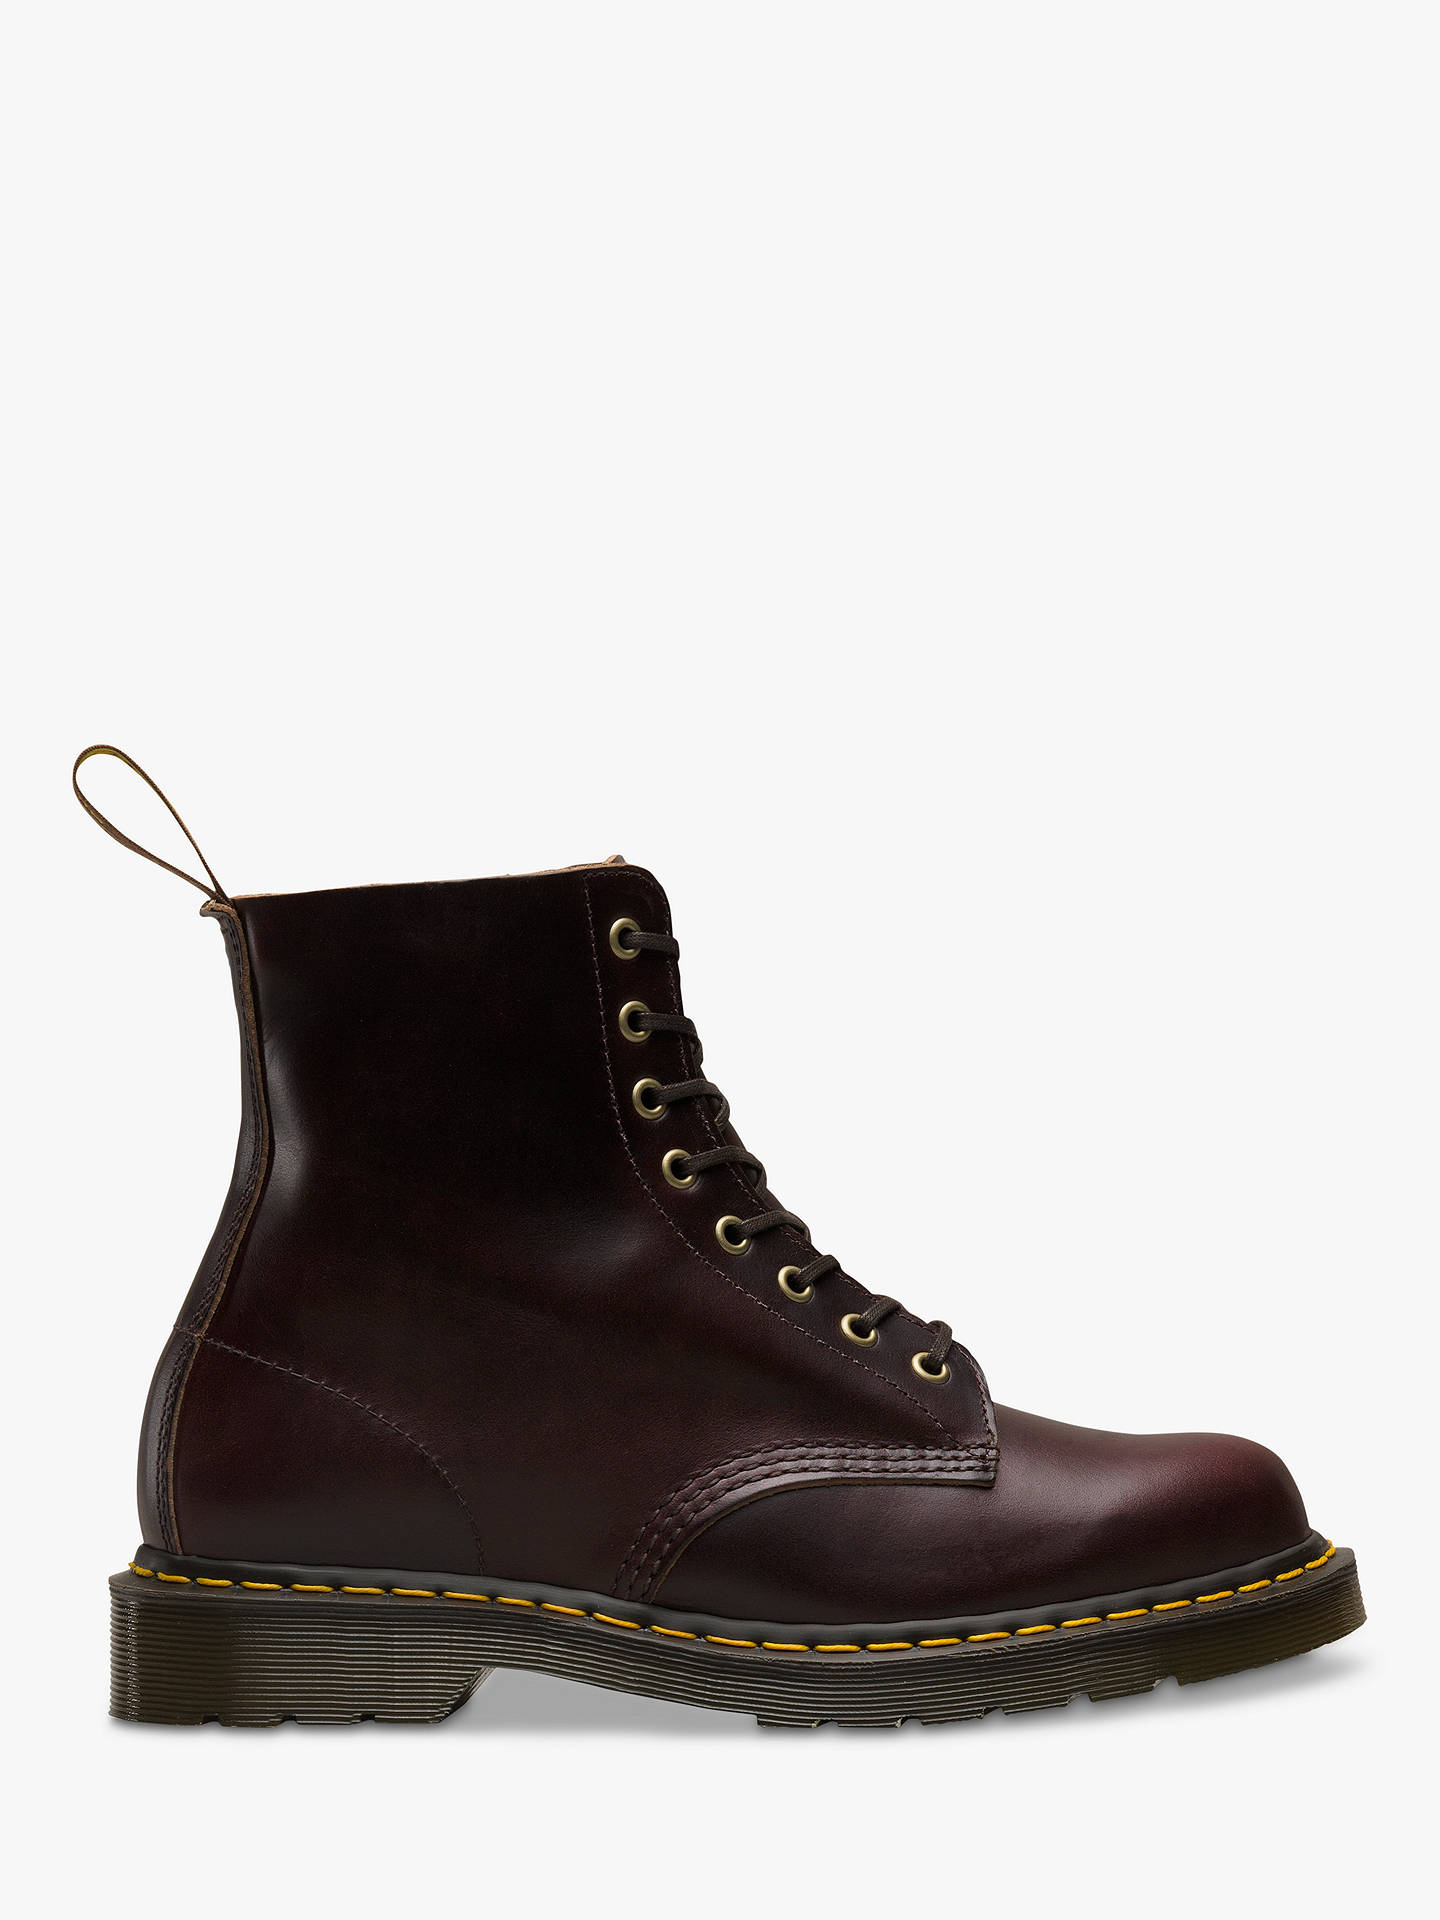 Dr Martens 1460 Pascal Leather Boots, Burgundy Chrome at John Lewis ...